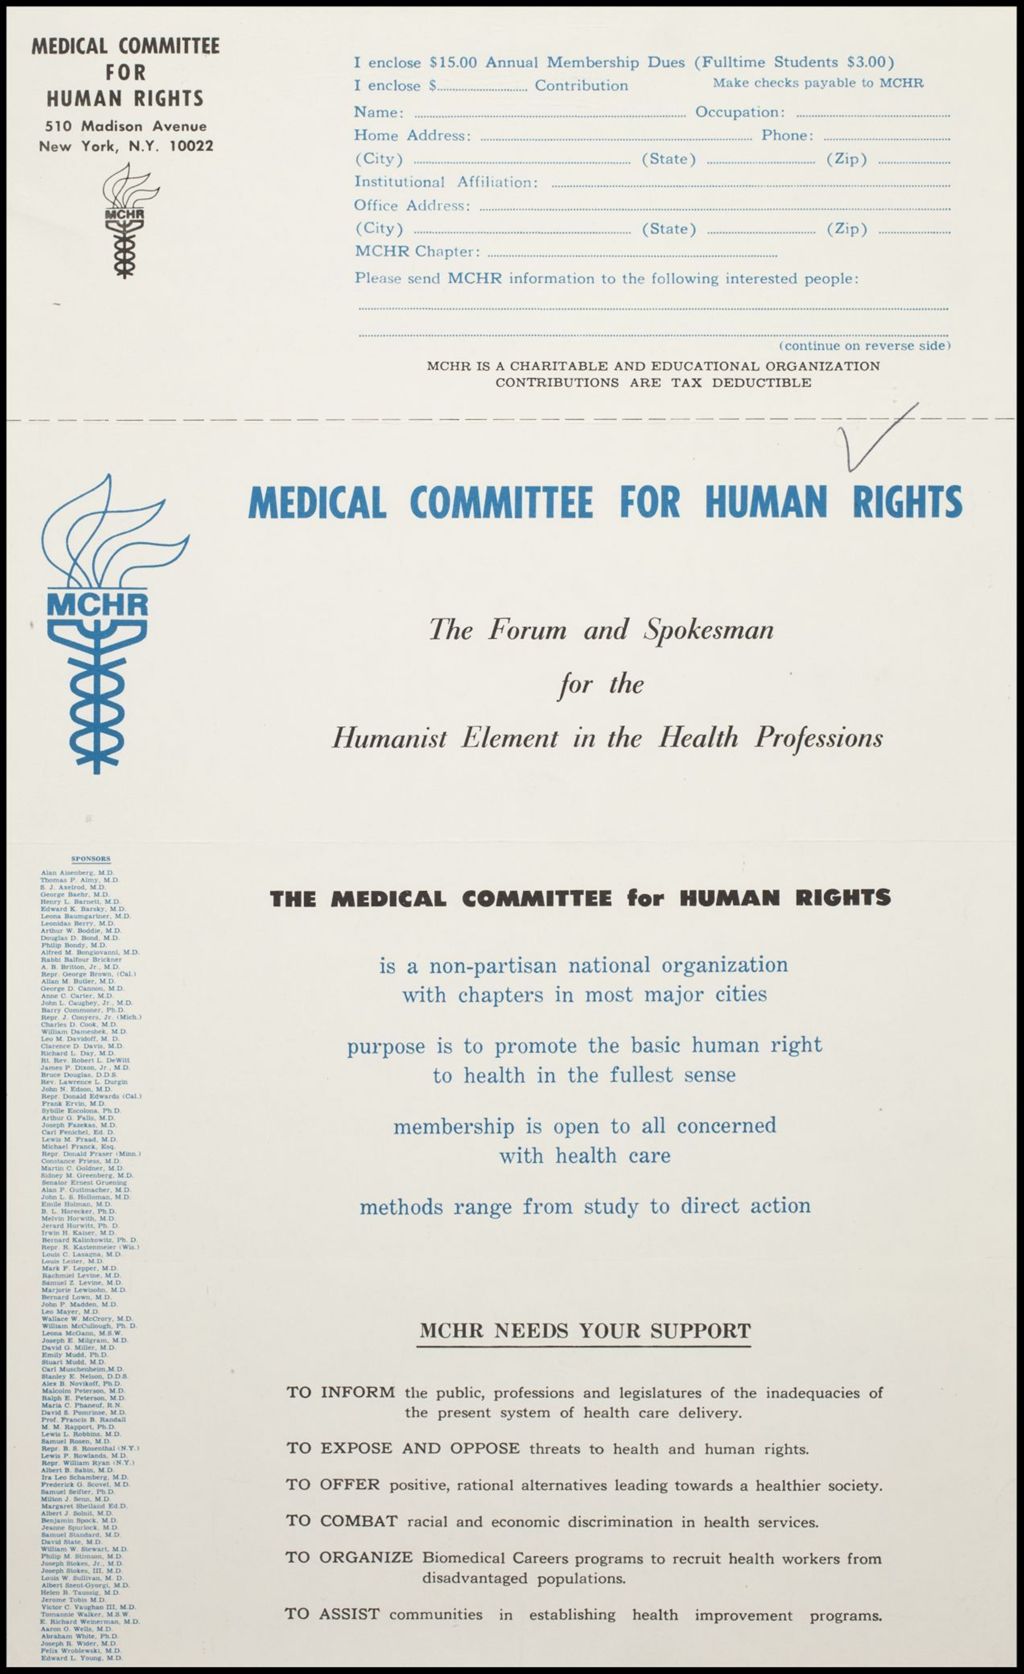 Miniature of Medical Committee for Human Rights, 1968 (Folder IV-1053)